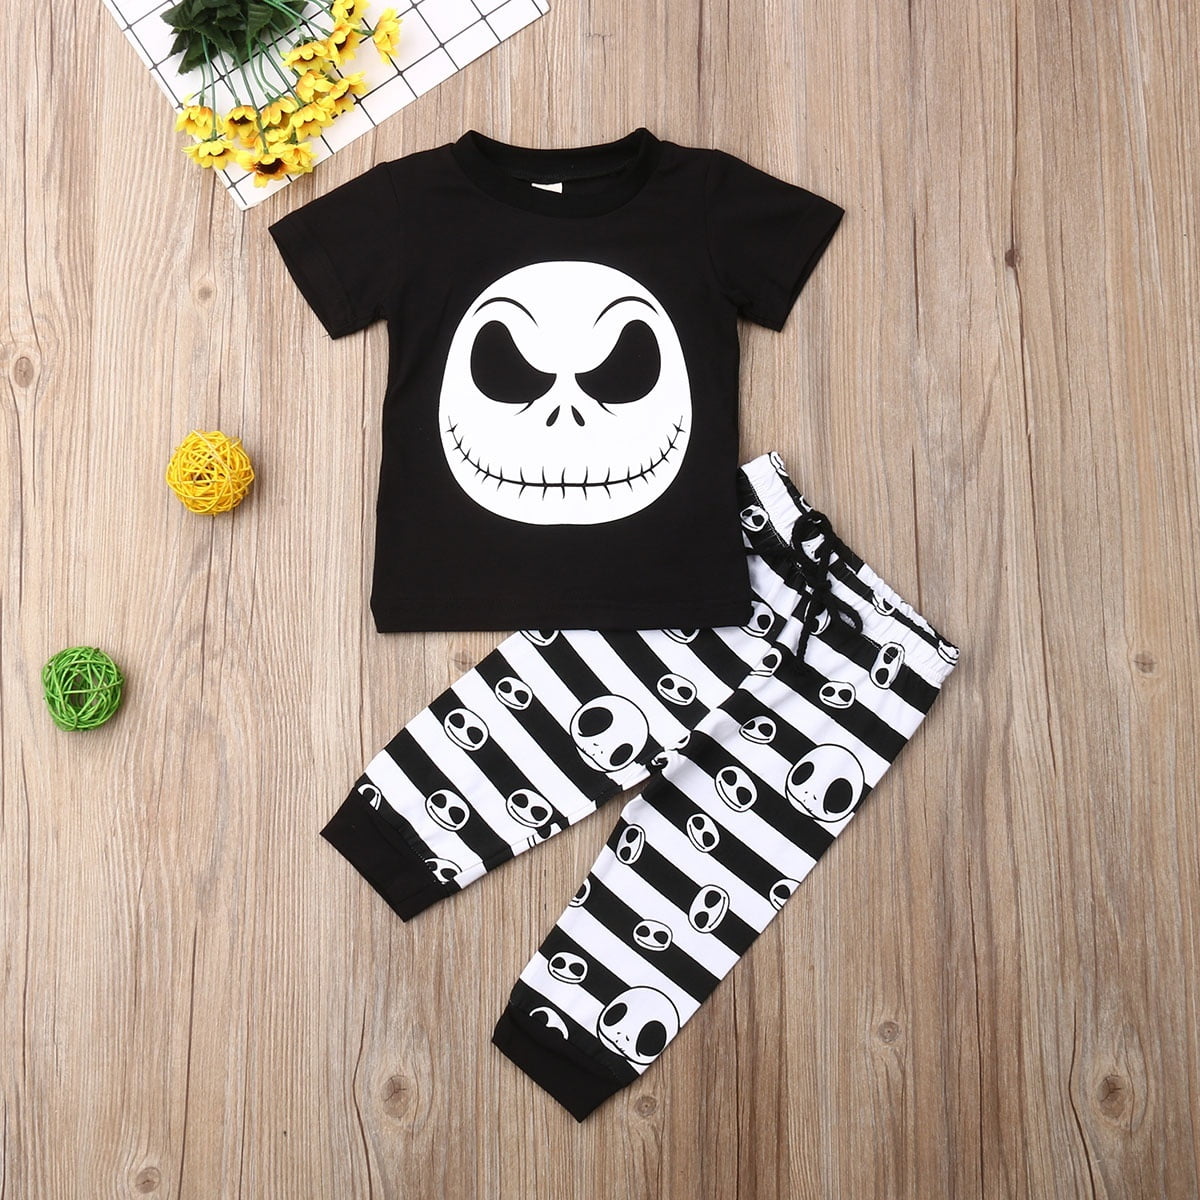 Halloween Newborn Baby Long Sleeve Top T-Shirt+Leggings Pants Outfit Clothes